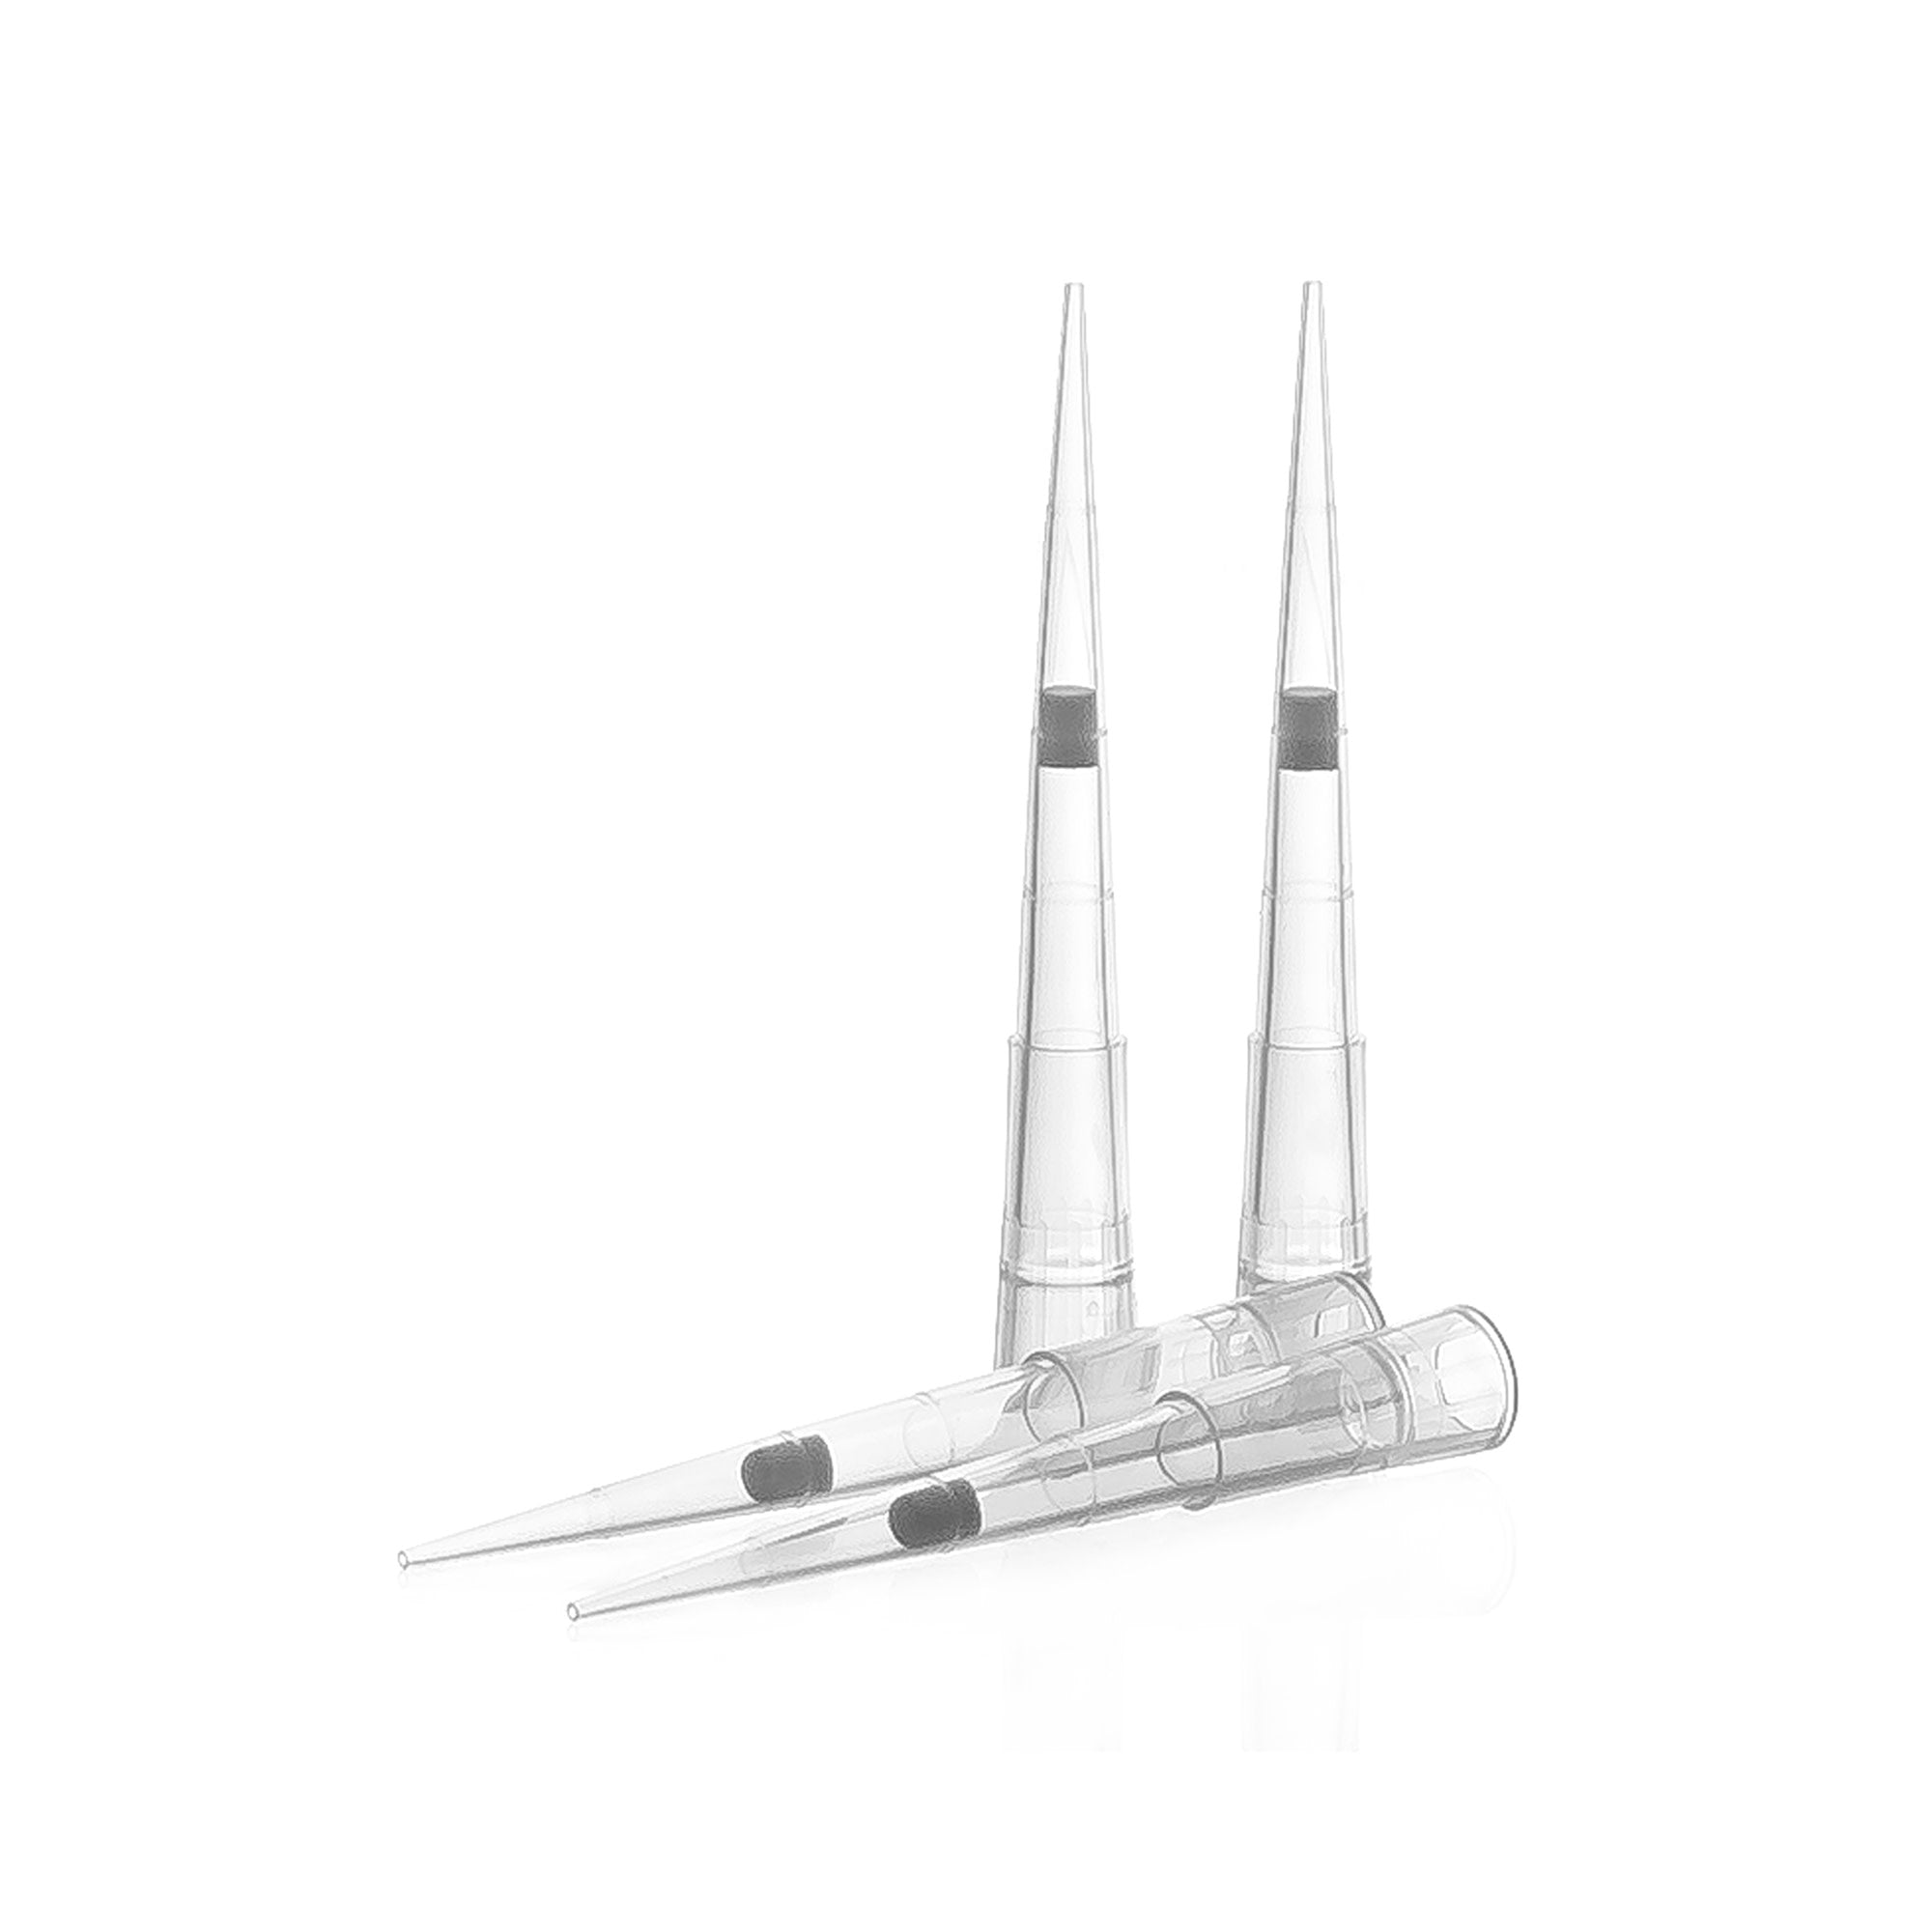 Filtered Micropipette Tips, 20µl capacity, Autoclavable, Pack of 1000